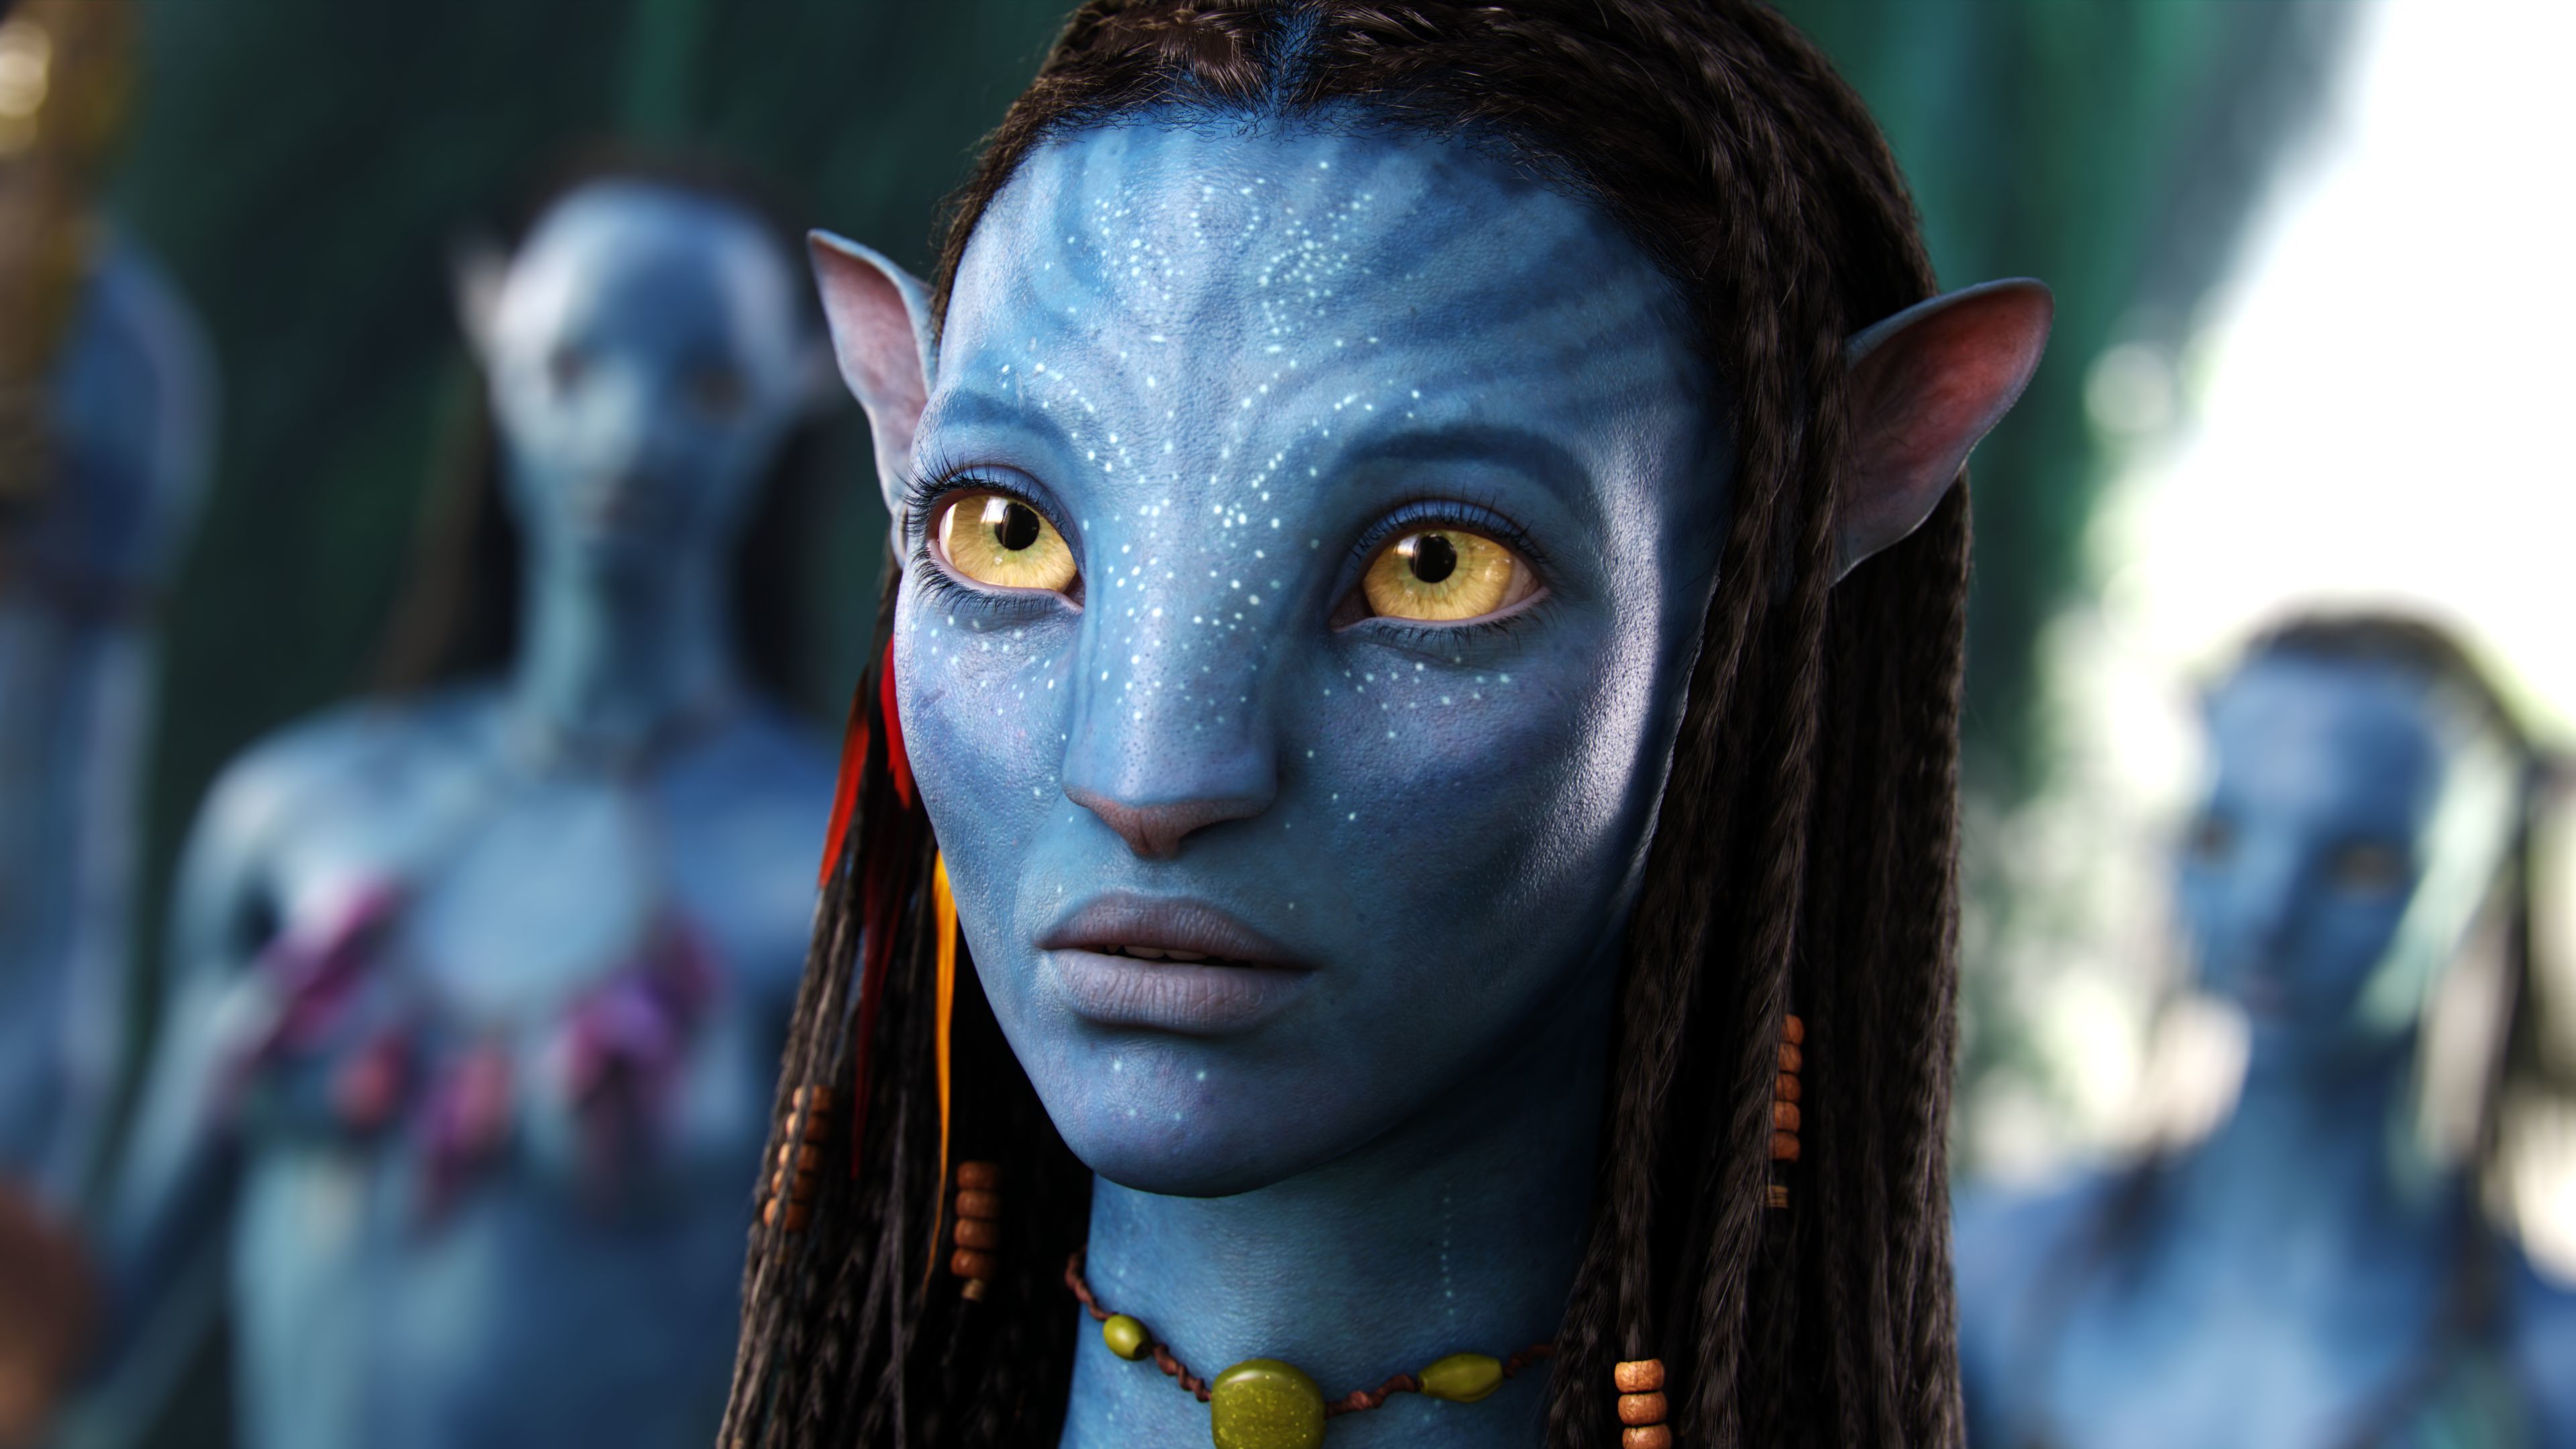 Avatar 2 Trailer Teases an Epic Battle With Old Adversaries  United States  KNewsMEDIA